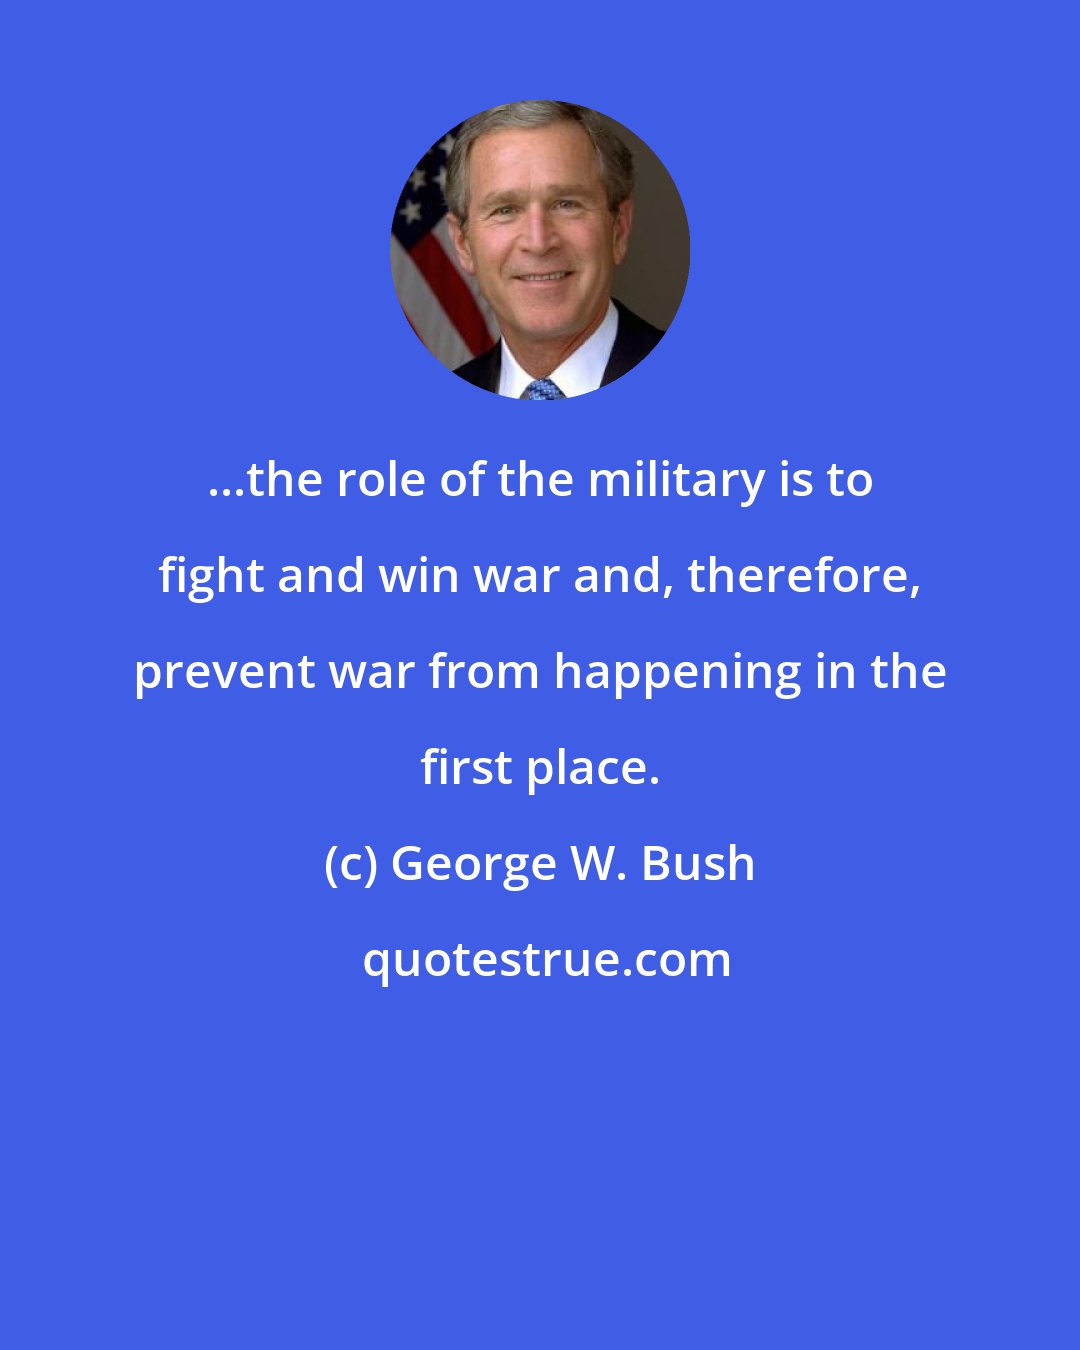 George W. Bush: ...the role of the military is to fight and win war and, therefore, prevent war from happening in the first place.